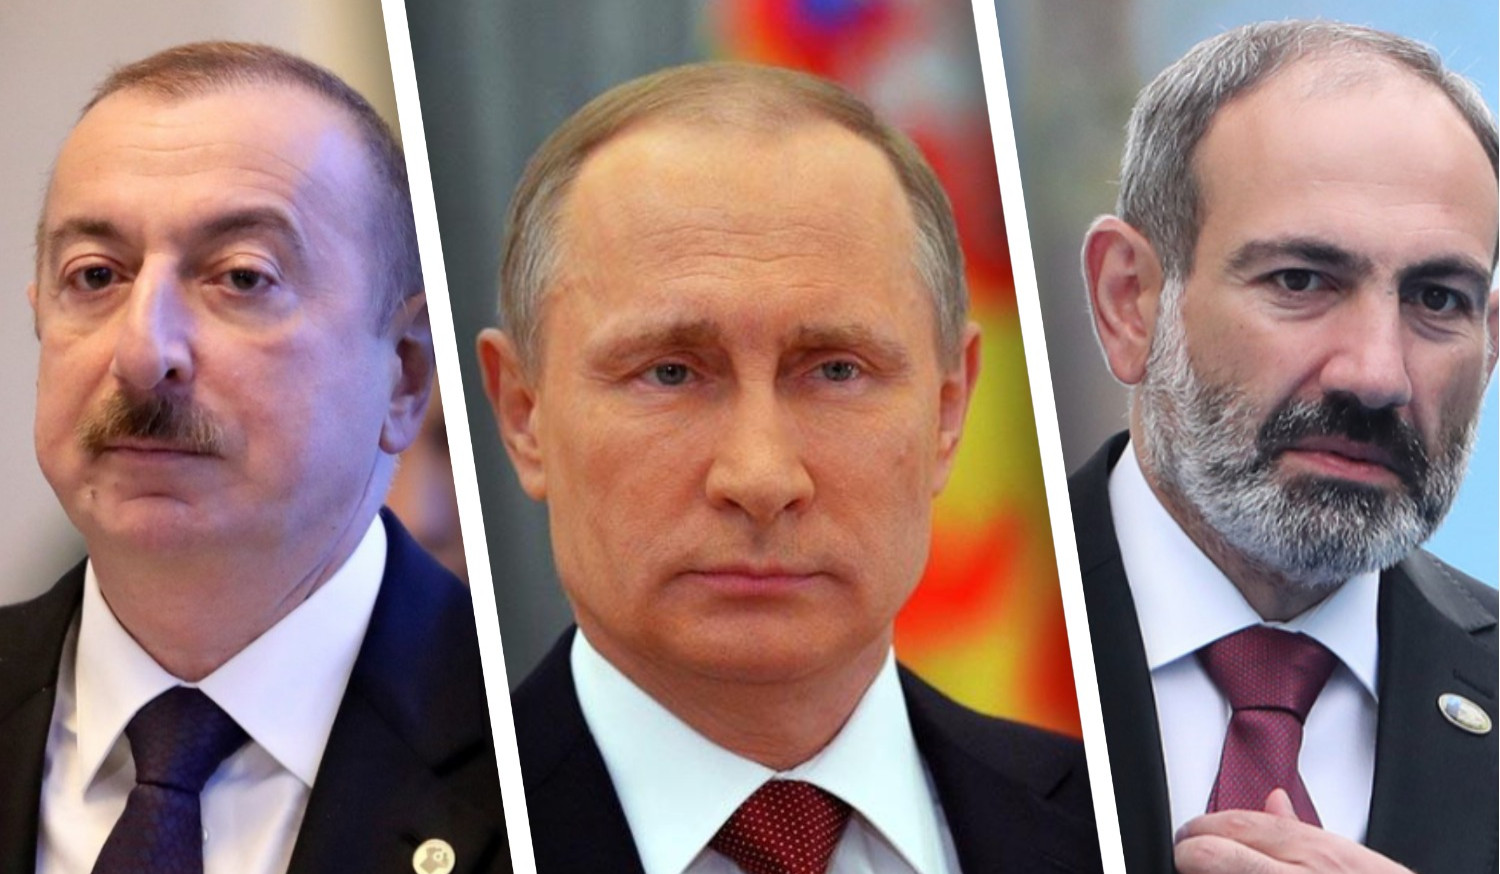 Importance of fulfilling trilateral agreements reaffirmed: Putin had telephone conversations with Pashinyan and Aliyev